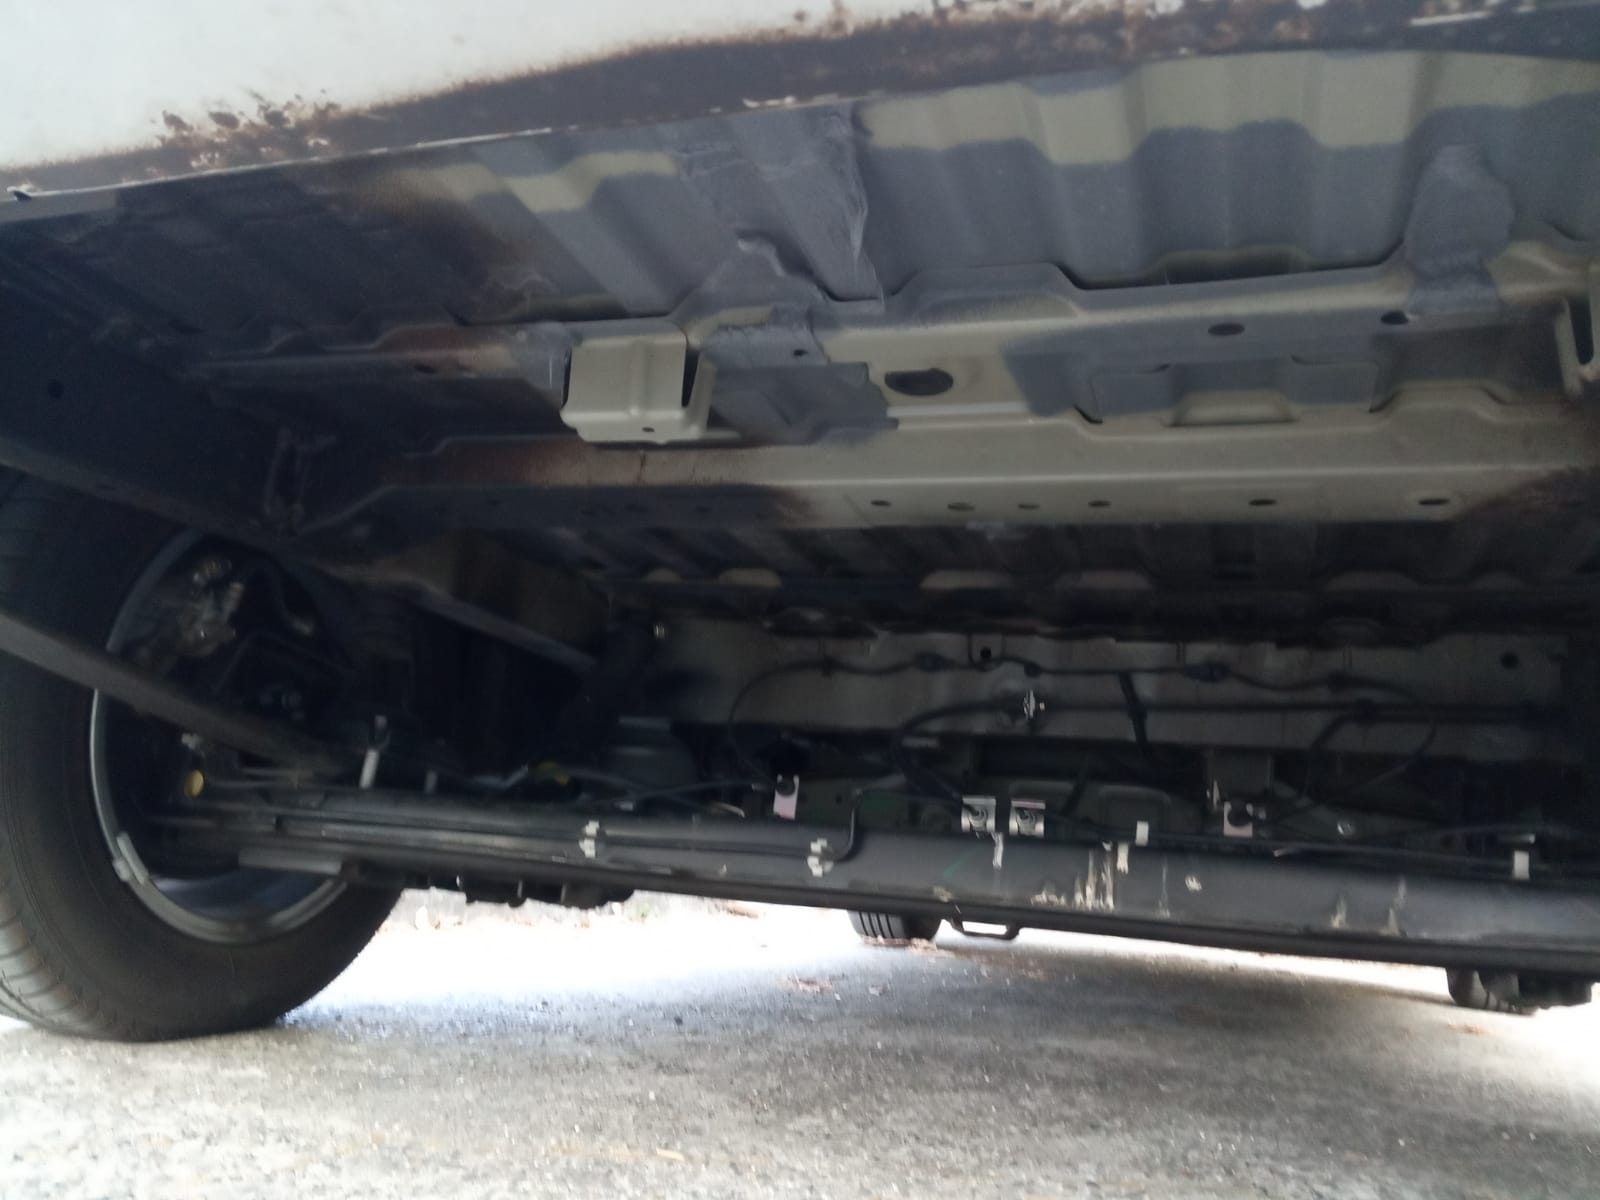 the underside of the car - the rear is quite awful.